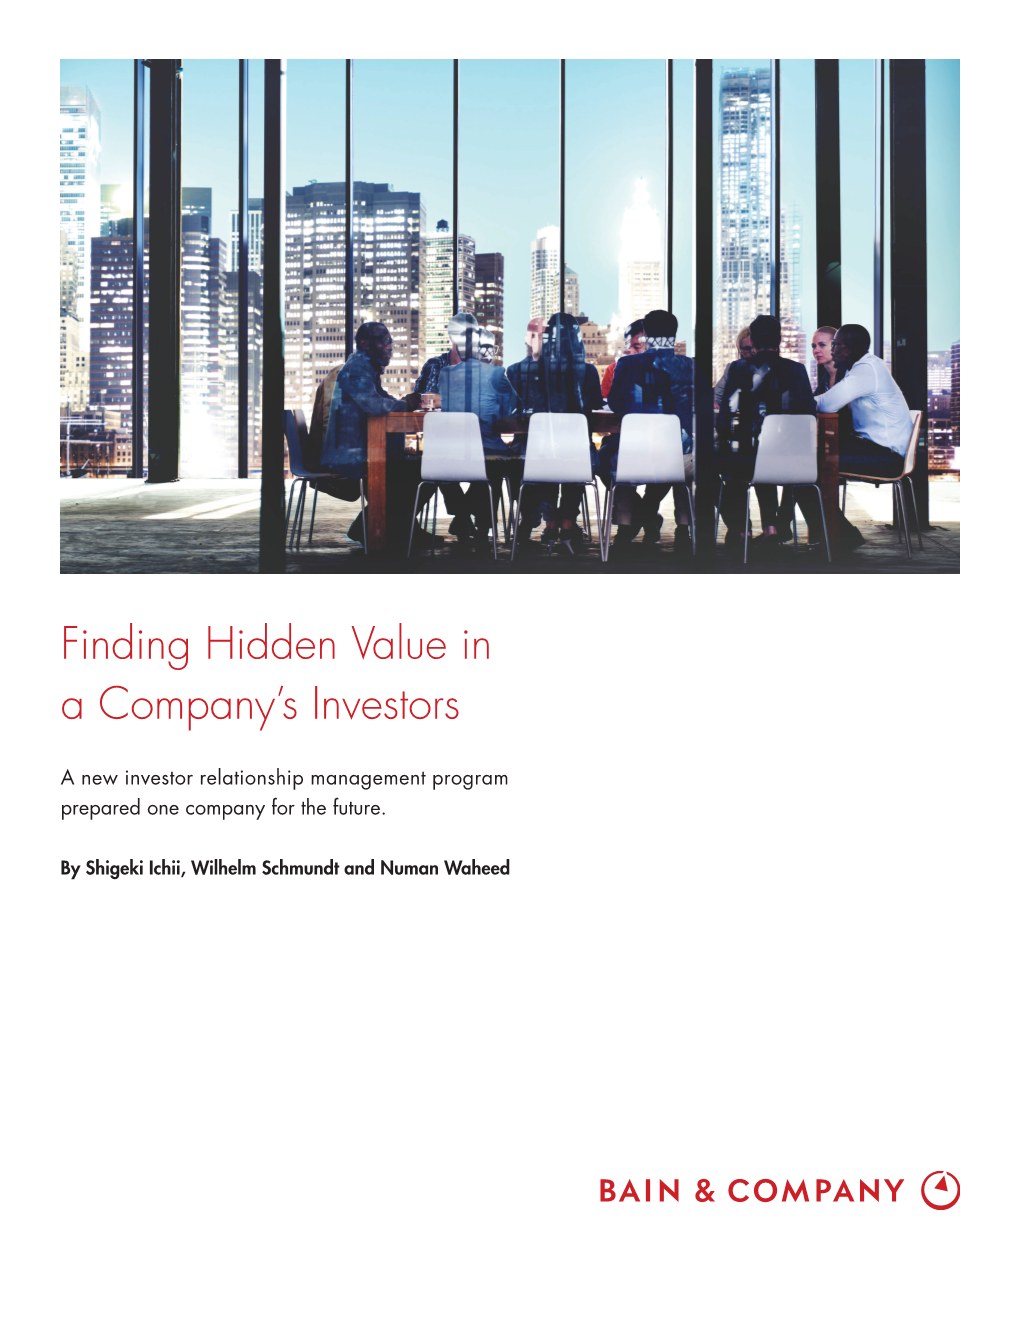 Finding Hidden Value in a Company's Investors